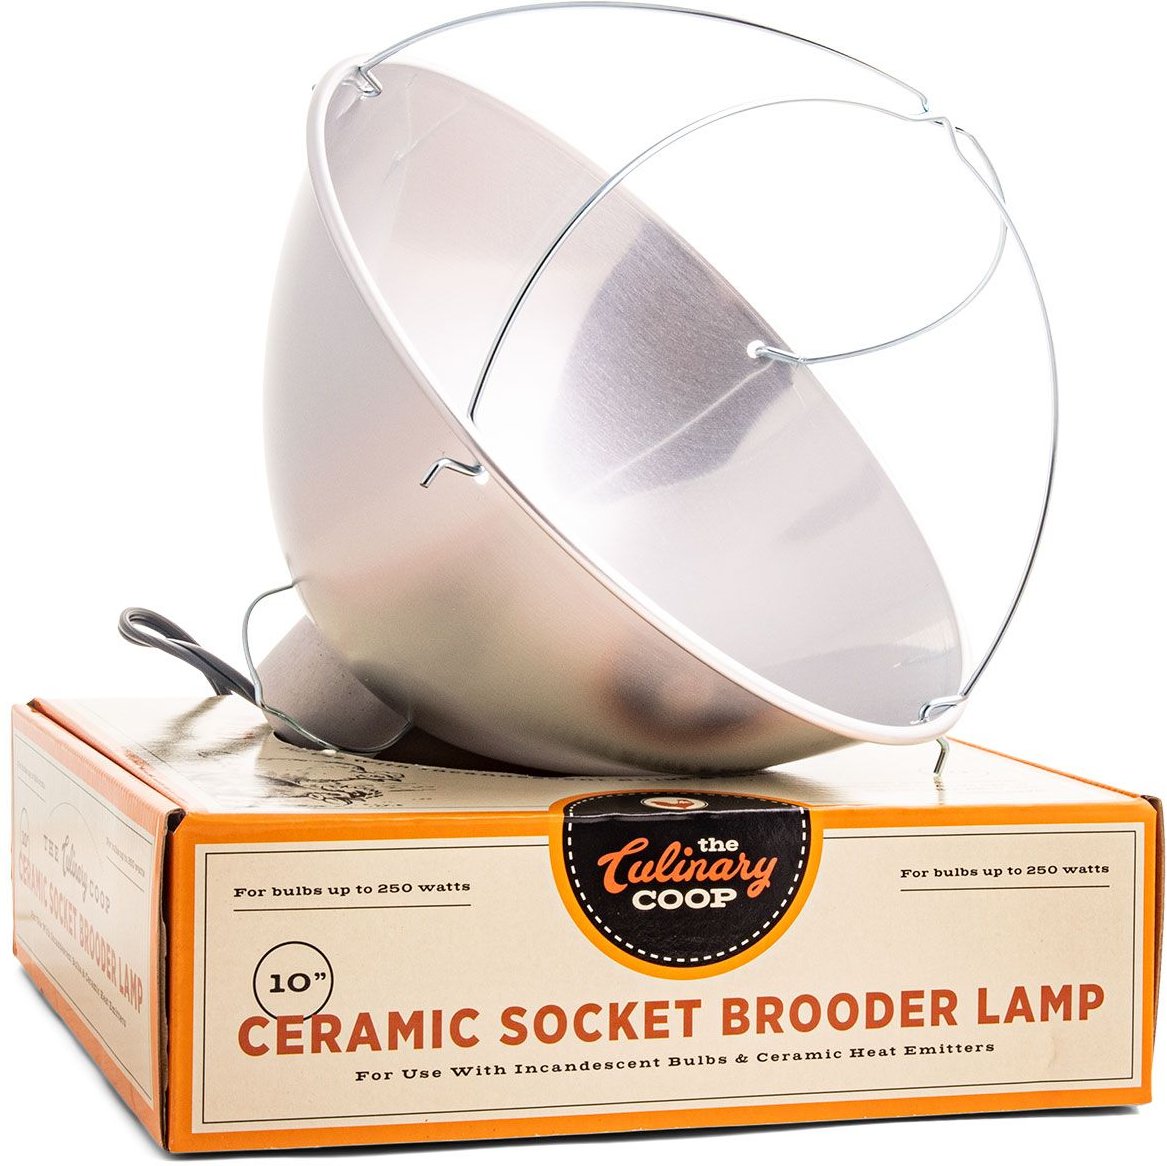 Culinary Coop Brooder Lamp for Chickens